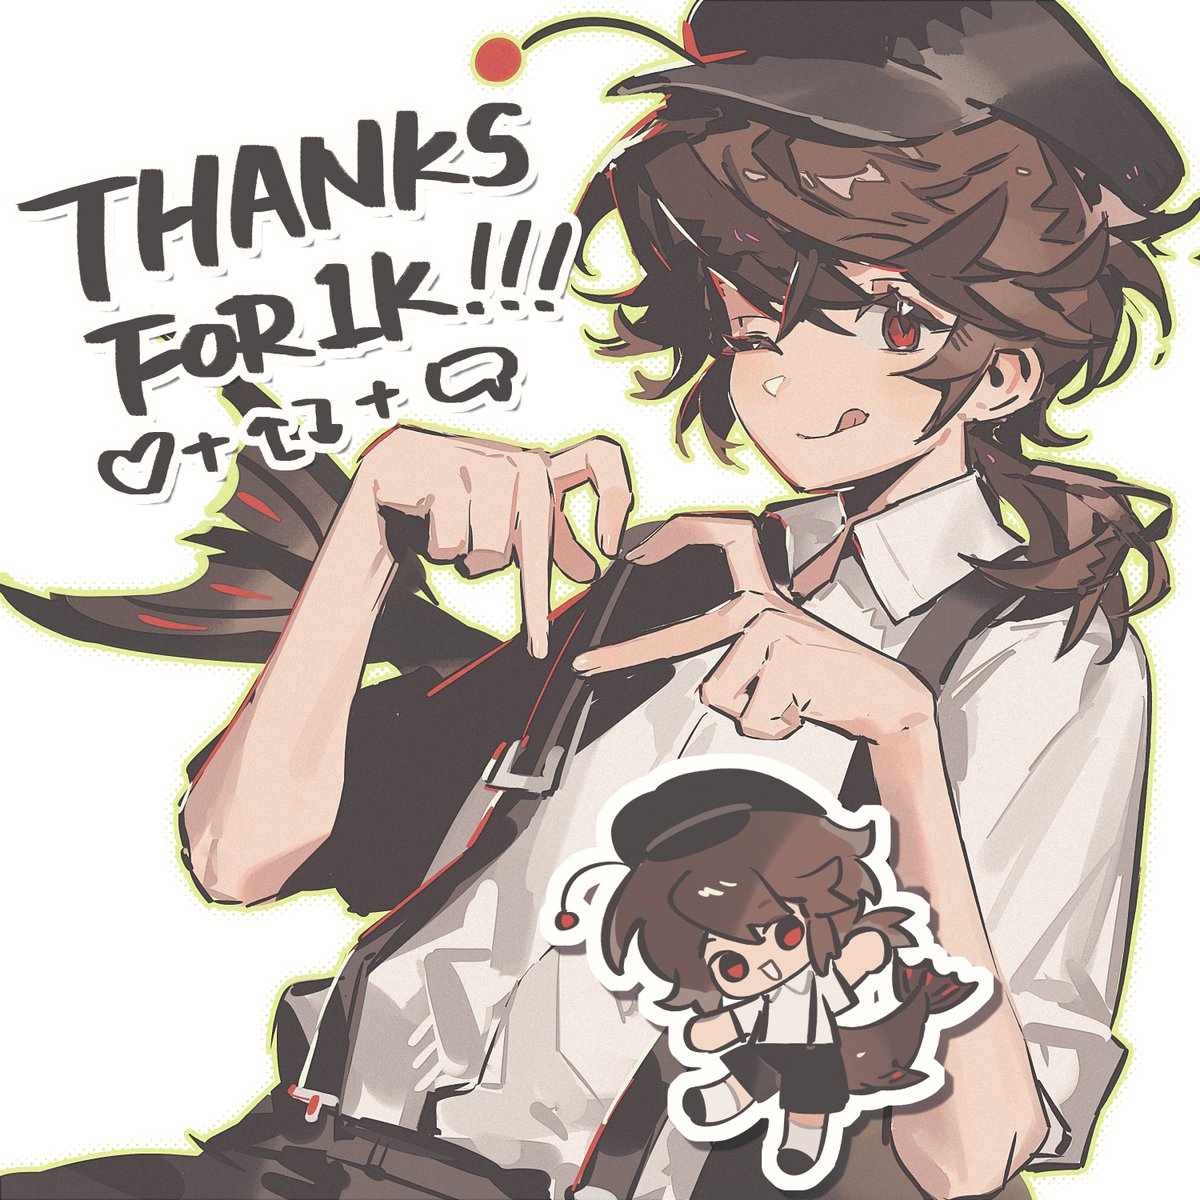 Thx for everyone's support! I am so glad to see I finally hit the 1k, and I want to do an #artraffle to celebrate this!! !!Follow + RT (no QRTs) + like + comment with your OC (optional) to enter!! 1 Winner will get a colored sketch + little chibi bean of your OC! Ends Jun 1st